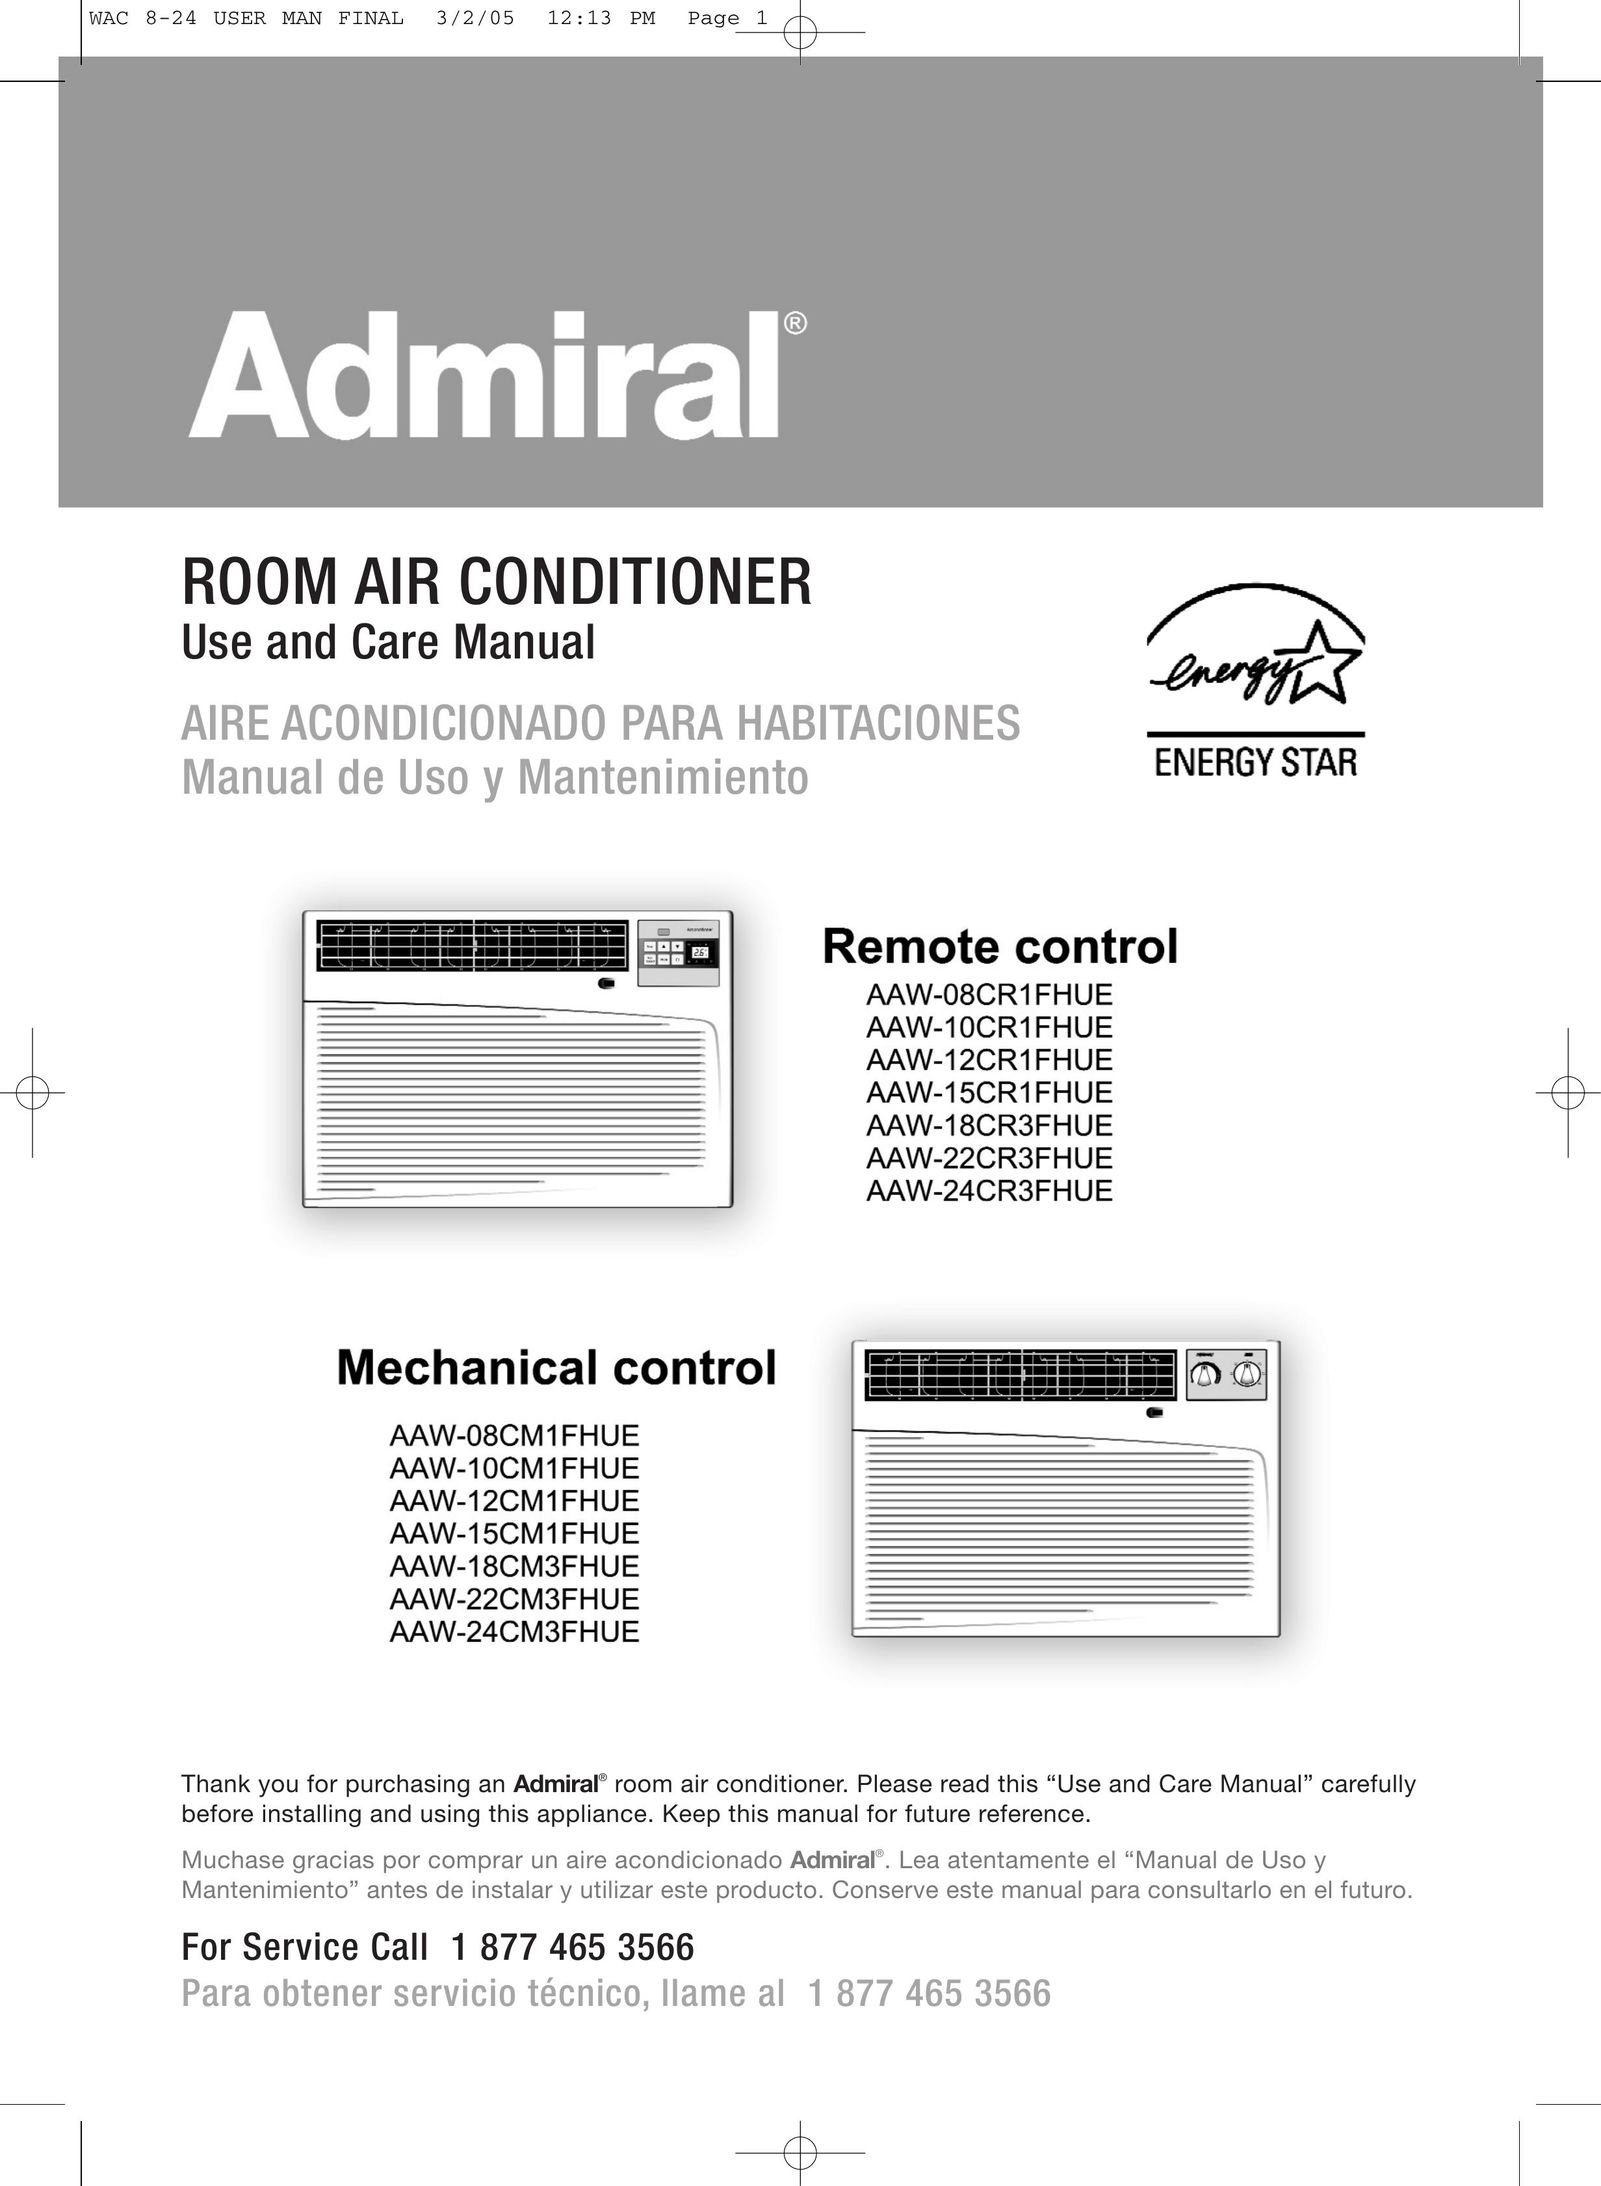 Admiral AAW-24CM1FHUE Air Conditioner User Manual